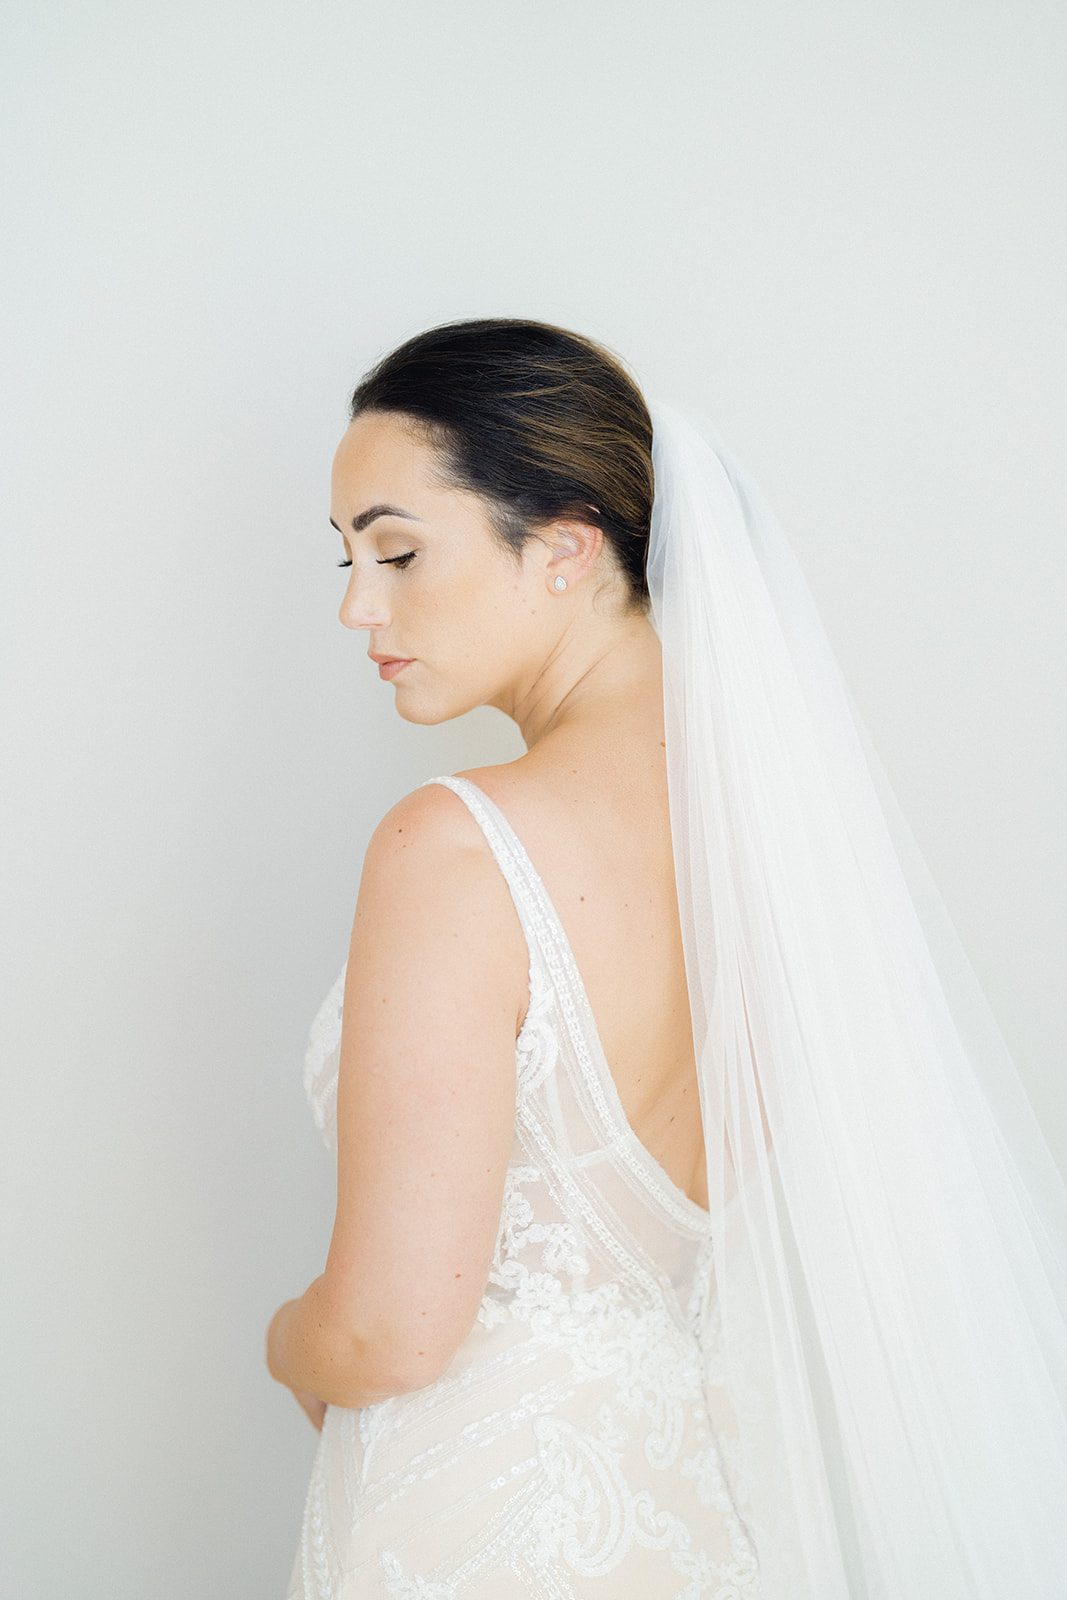 The bride, with an updo hairstyle, wears her white veil to match her white lace dress